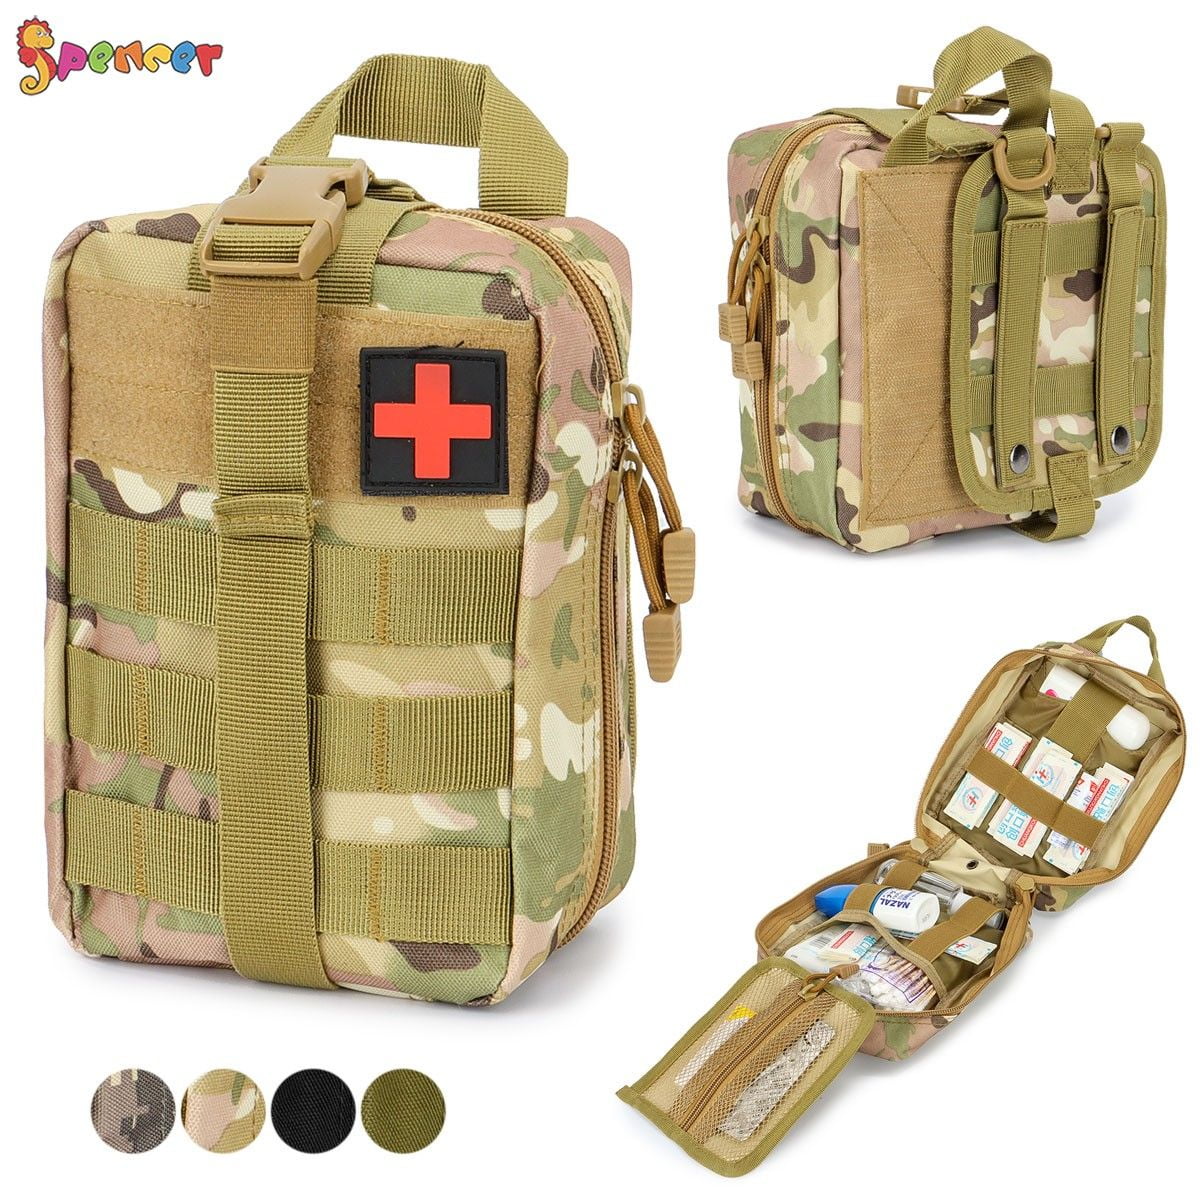 Tactical First Aid Pouch Kit Survival Military Medical Bag Utility Emergency Bag 